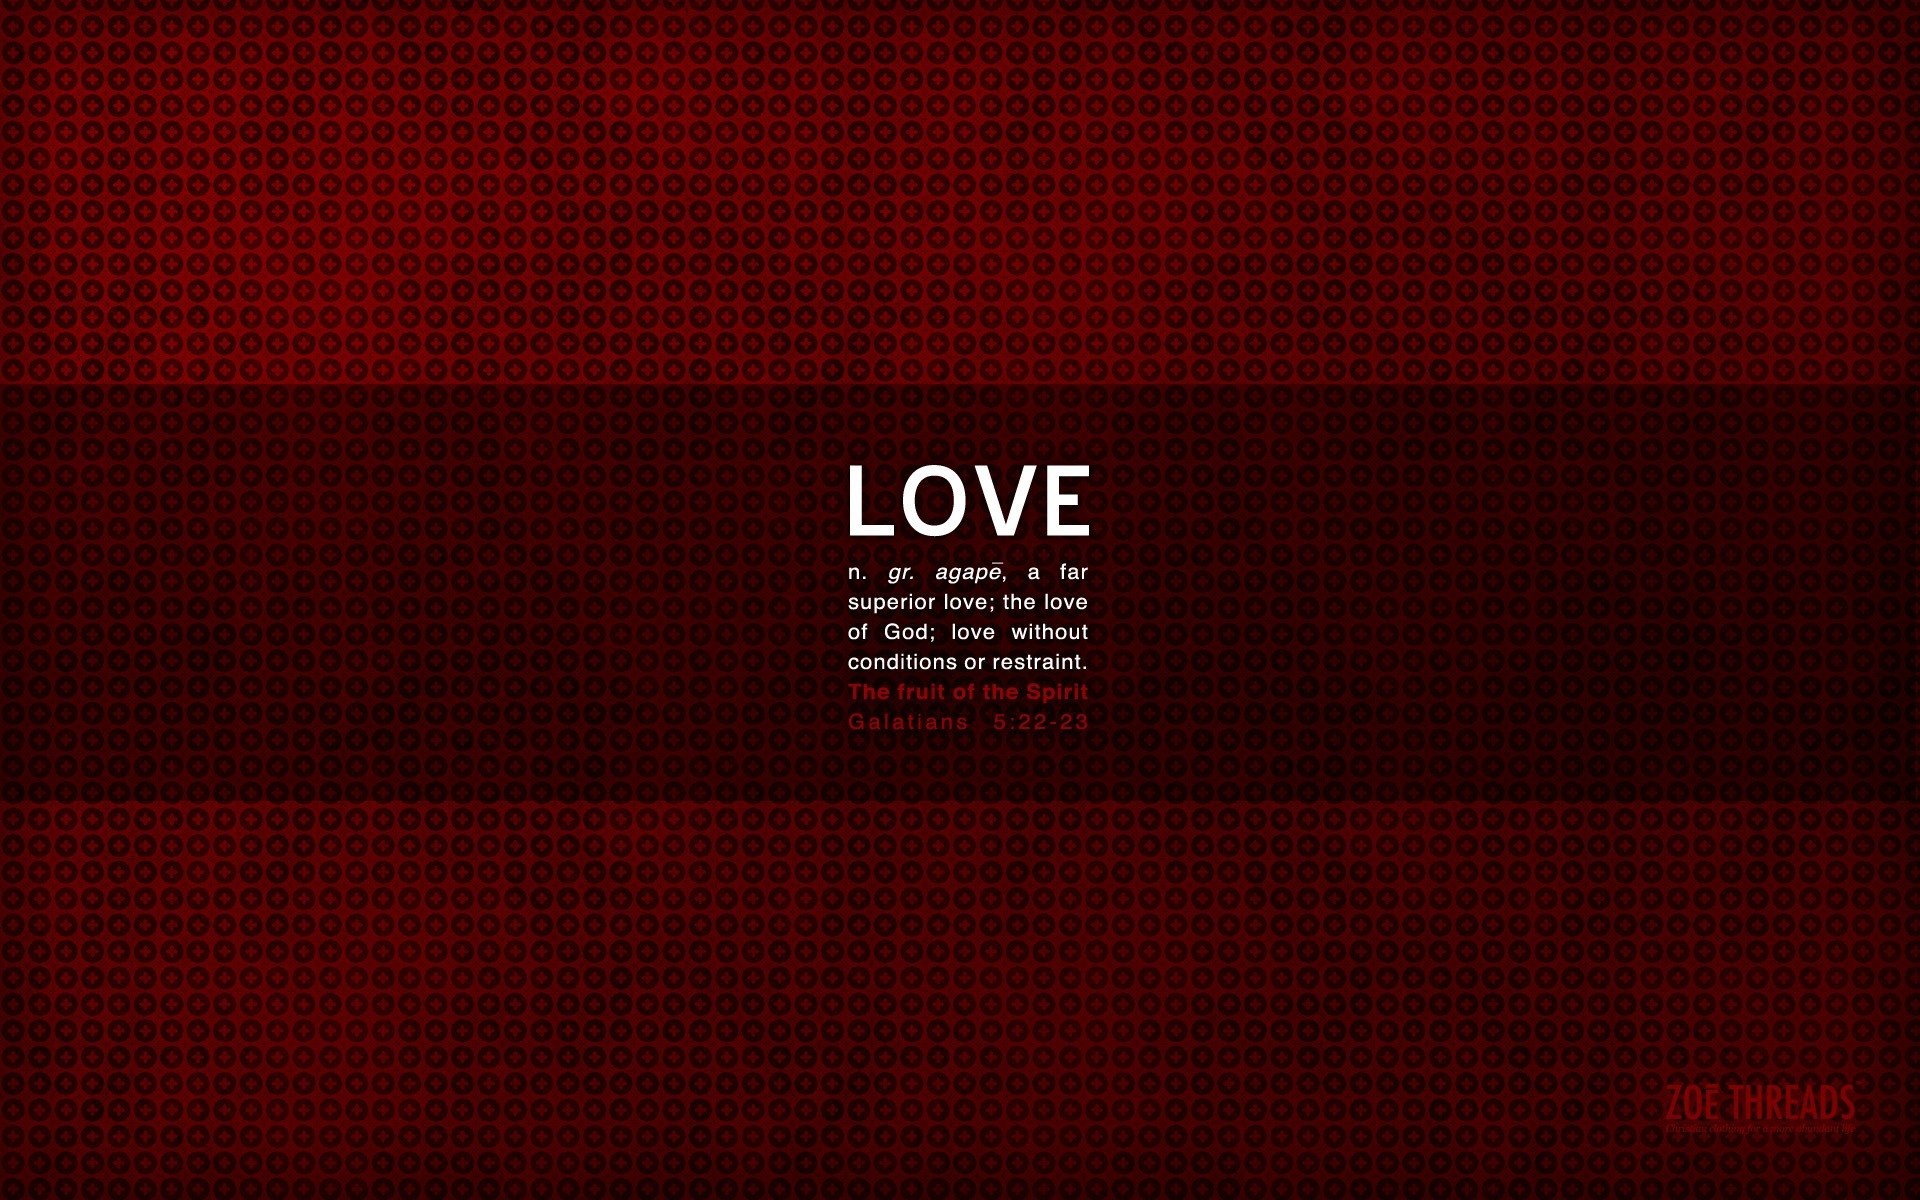 Christian background images ·① Download free High Resolution wallpapers